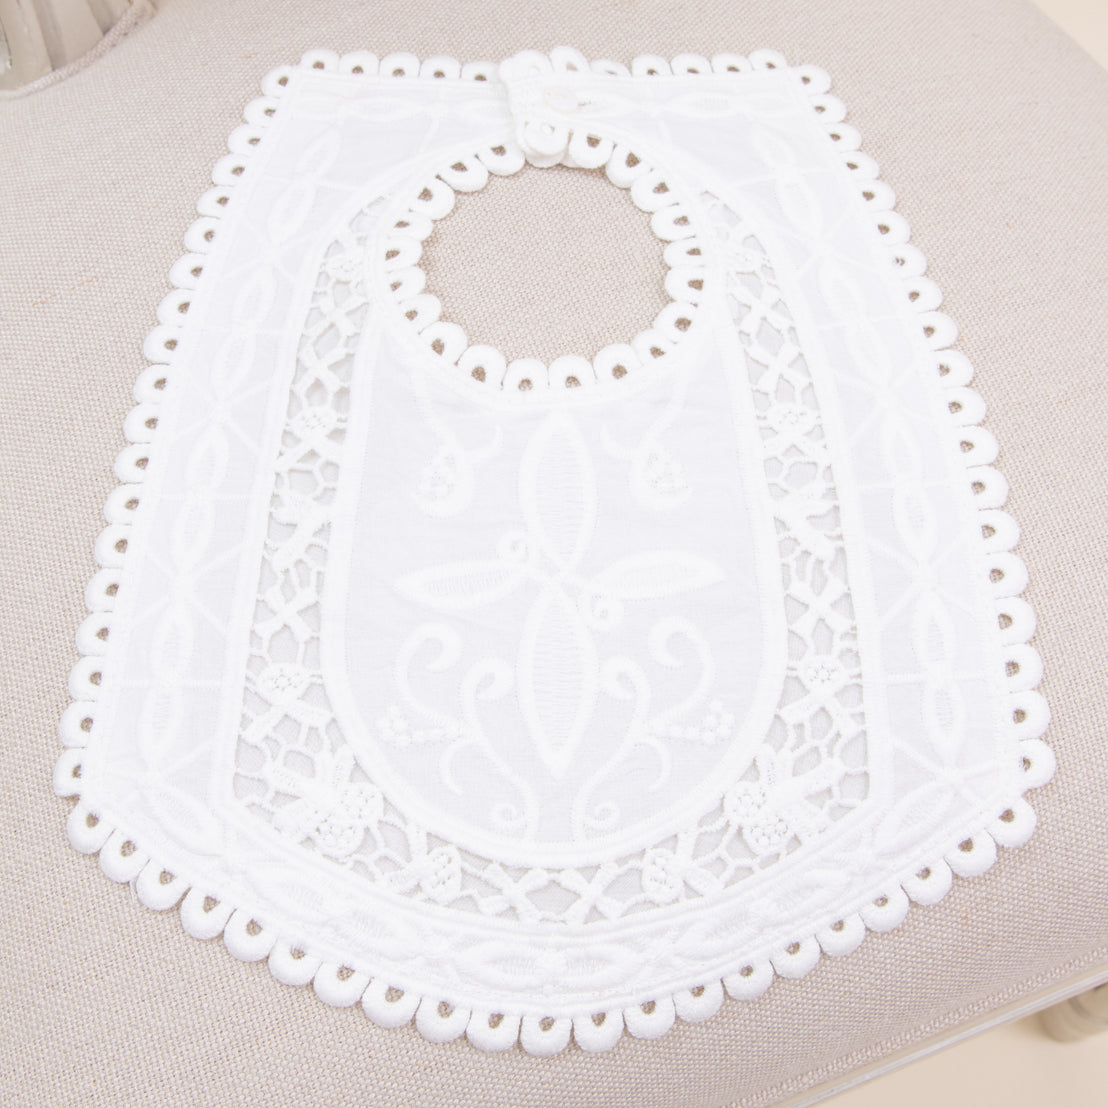 Flat lay photo of the Adeline baptism bib in cotton.